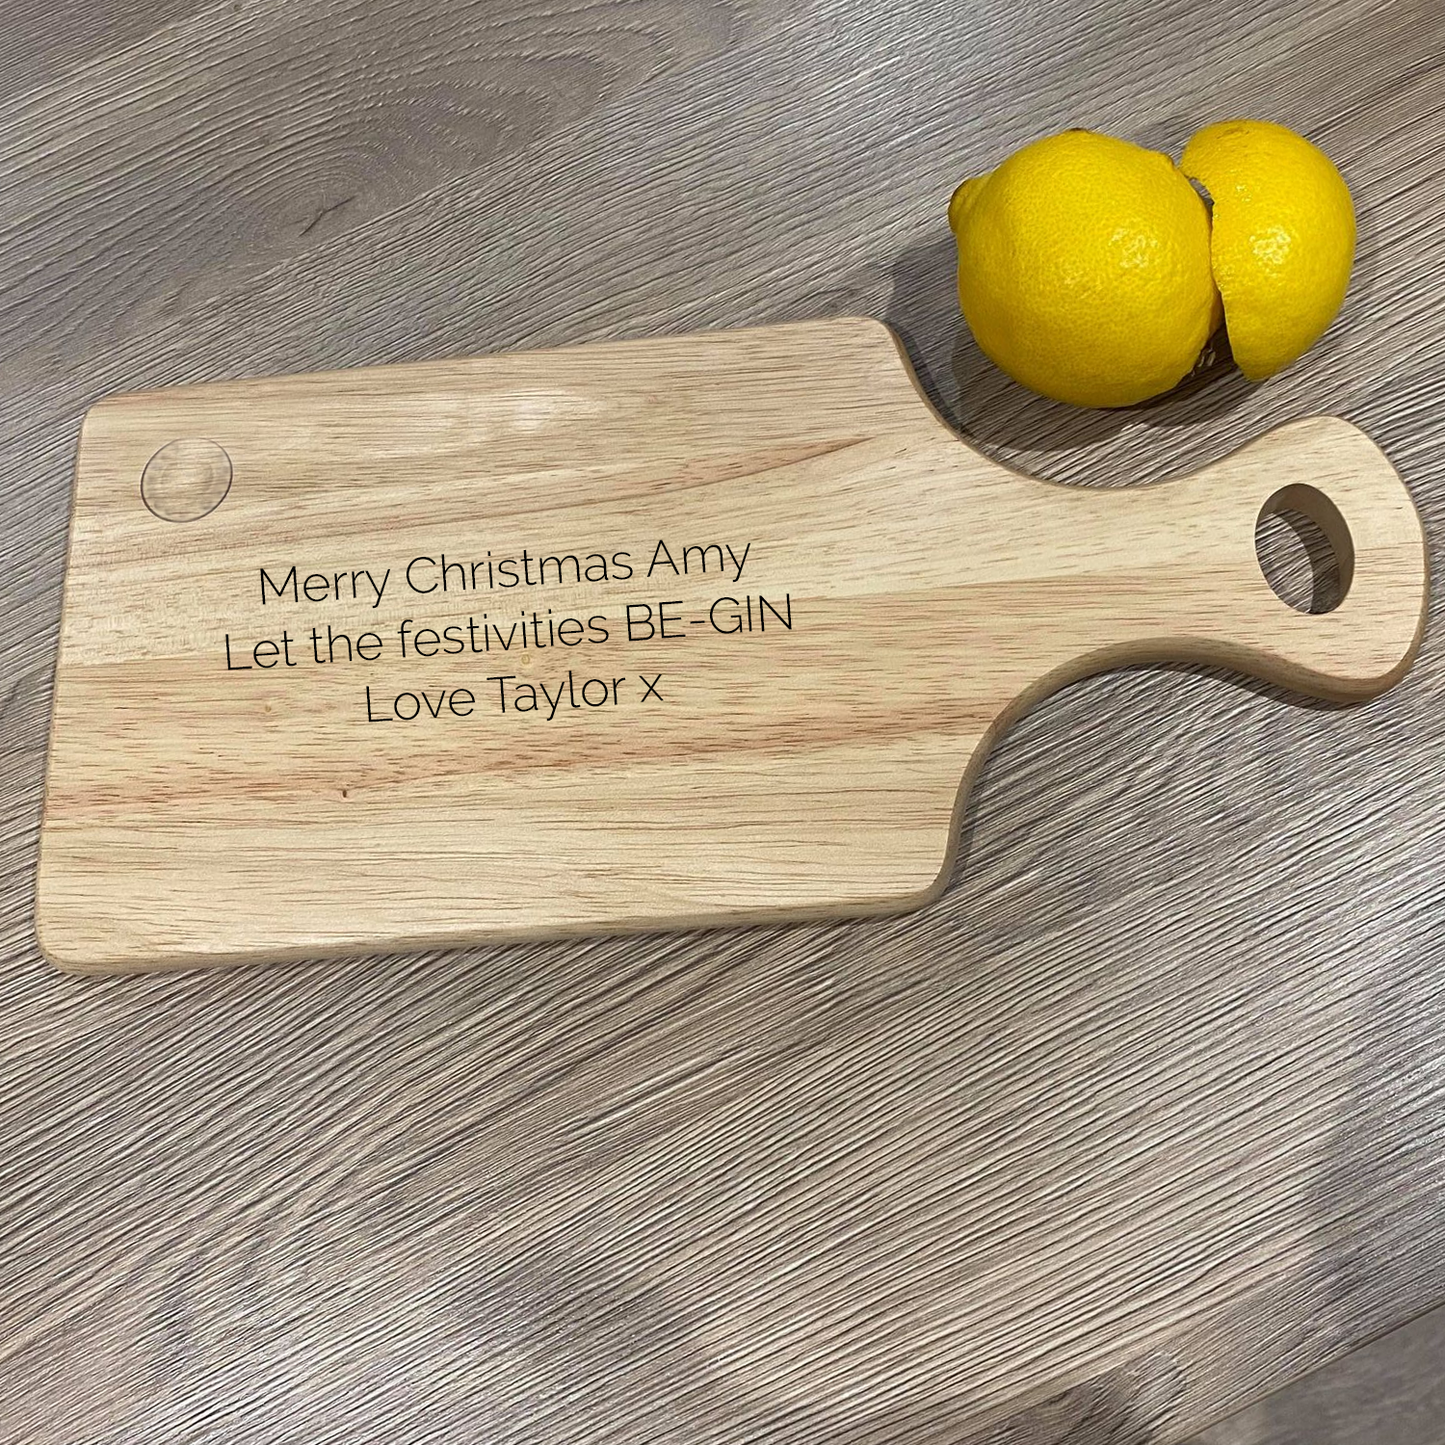 Personalised Gin Board - When life gives you lemons add gin & ice. Gift Idea